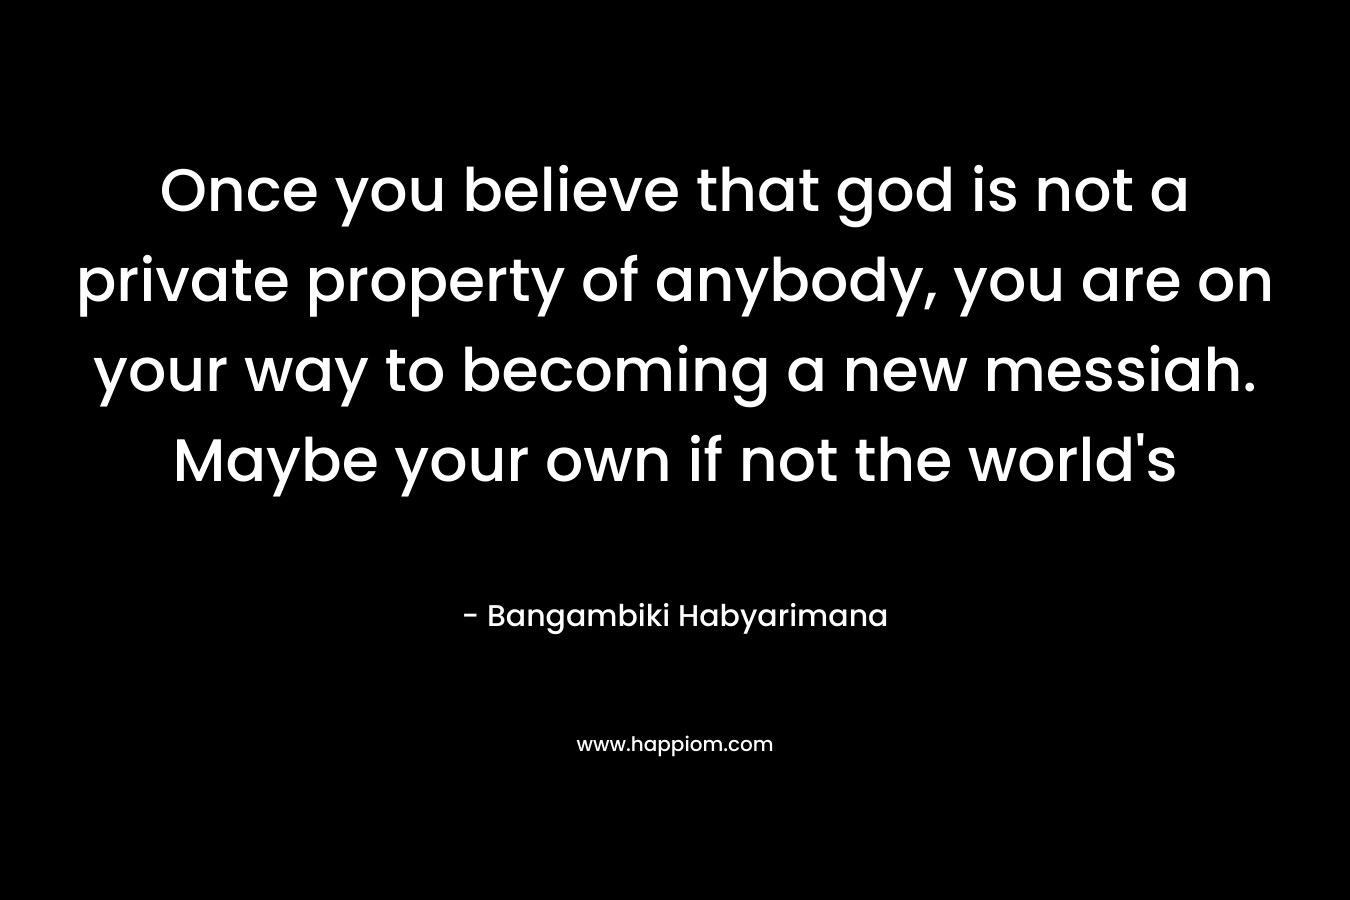 Once you believe that god is not a private property of anybody, you are on your way to becoming a new messiah. Maybe your own if not the world's